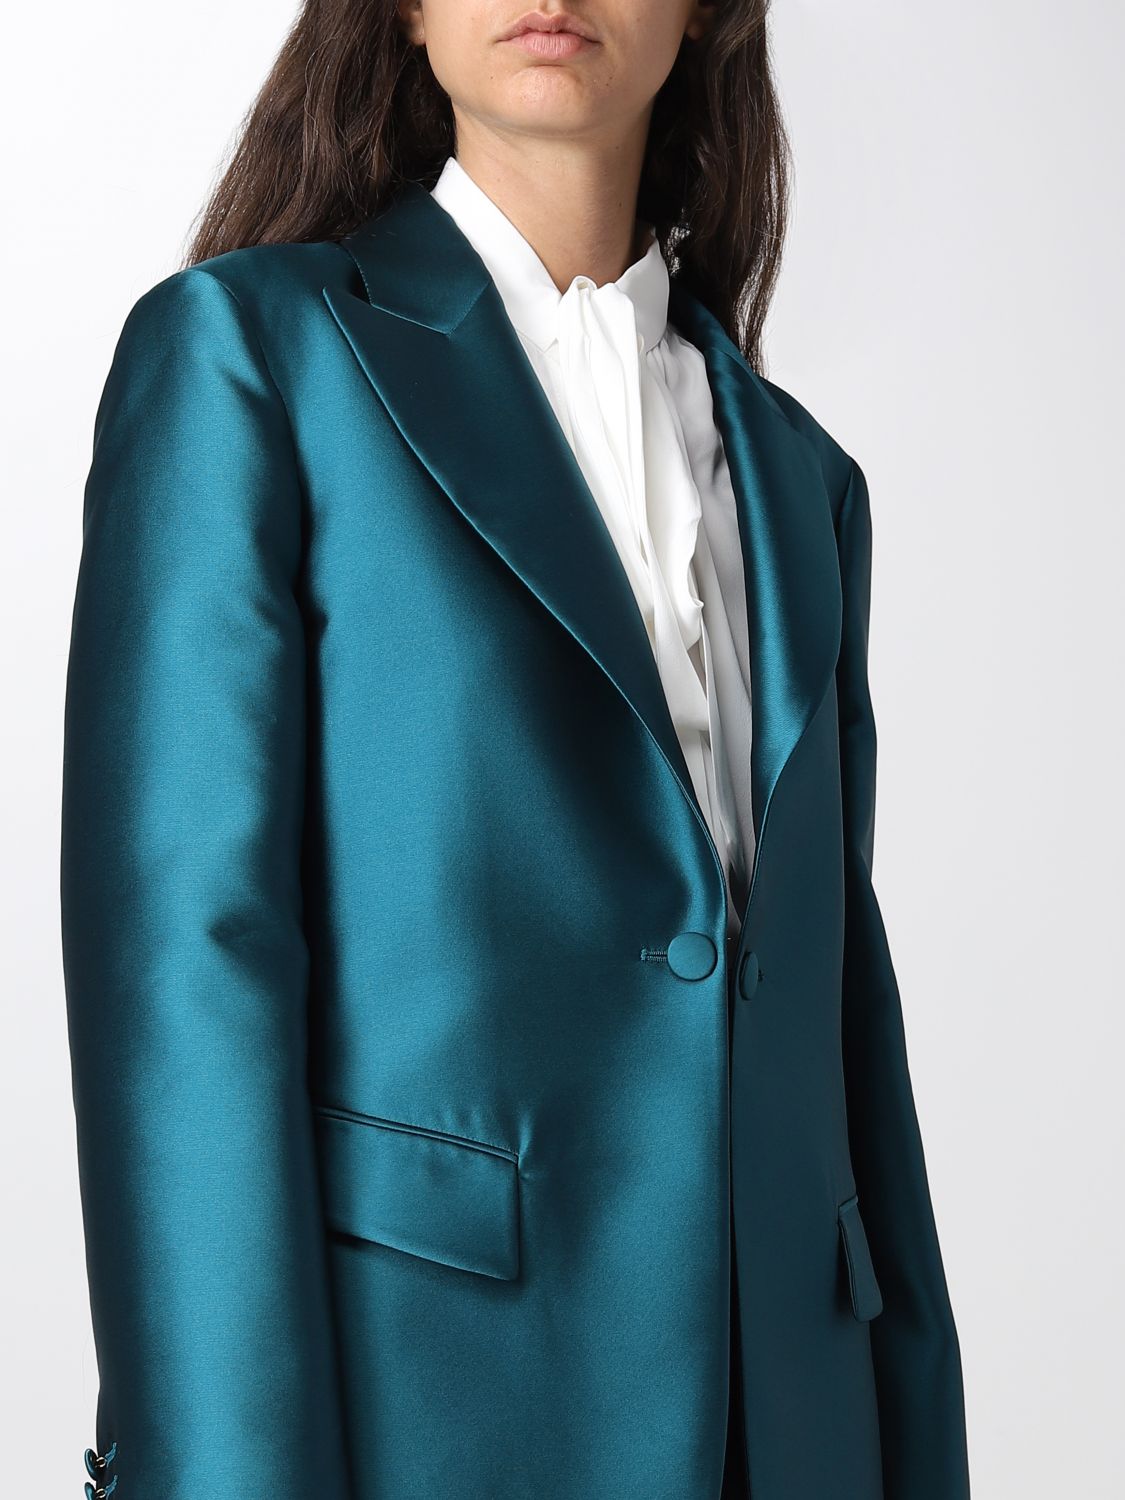 Womens Clothing Jackets Blazers Alberta Ferretti Synthetic Suit Jacket in Sage Green Green sport coats and suit jackets 